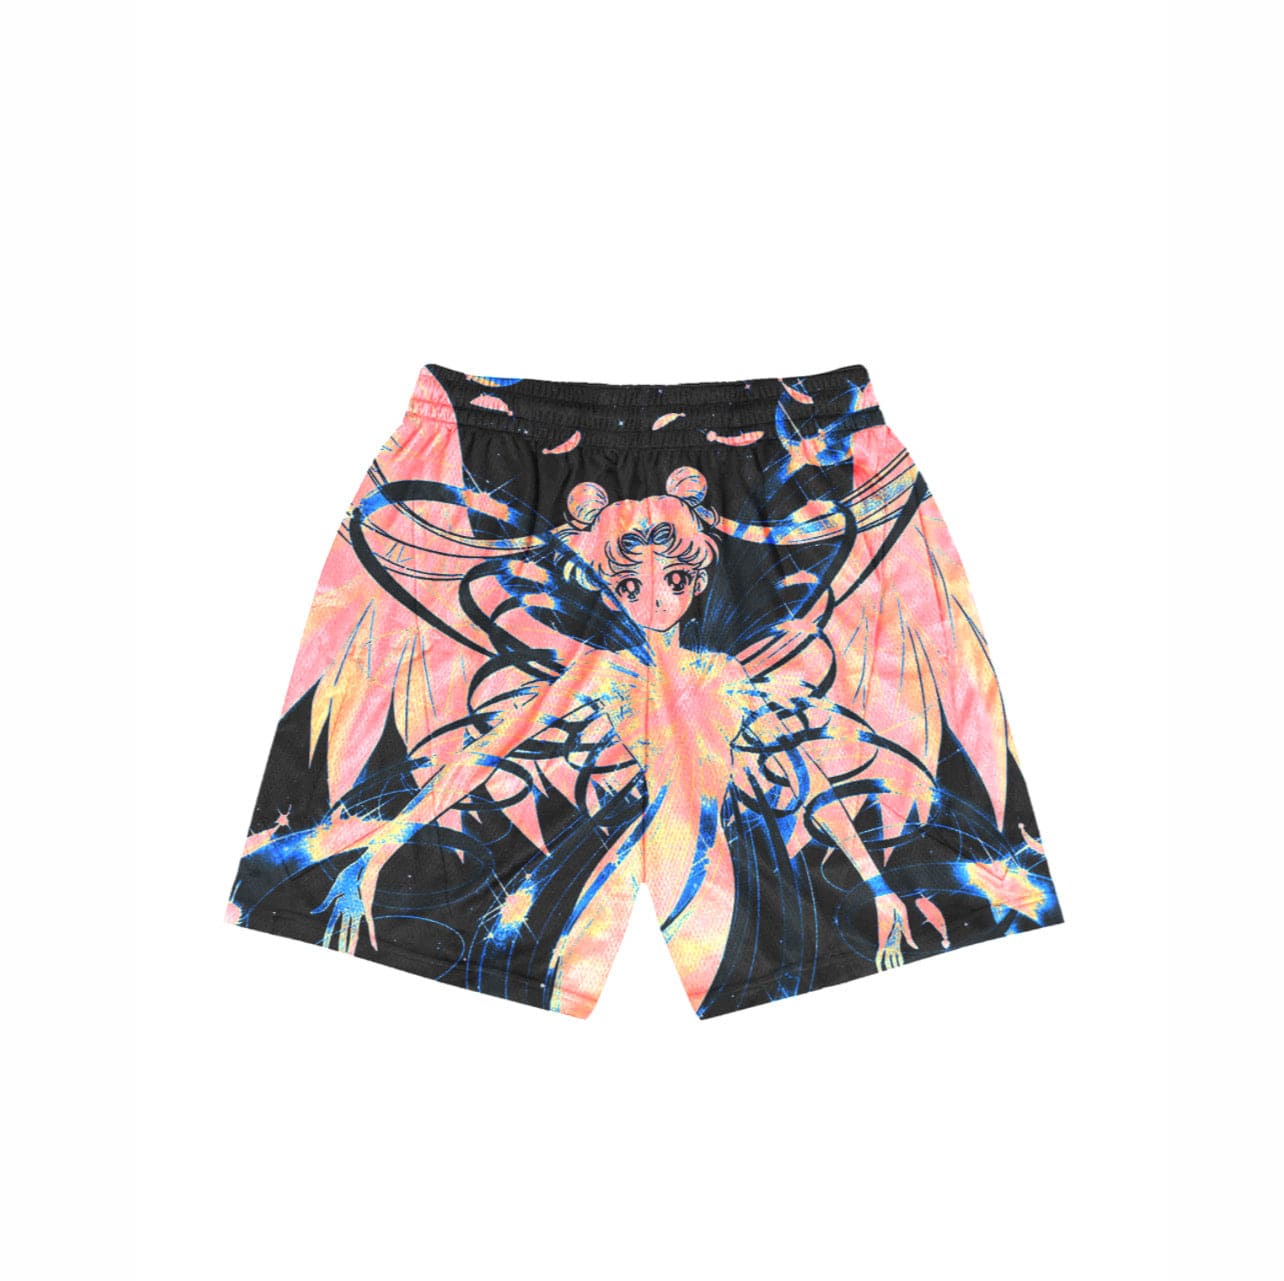 “The Rise of Moon 2” Mesh Shorts